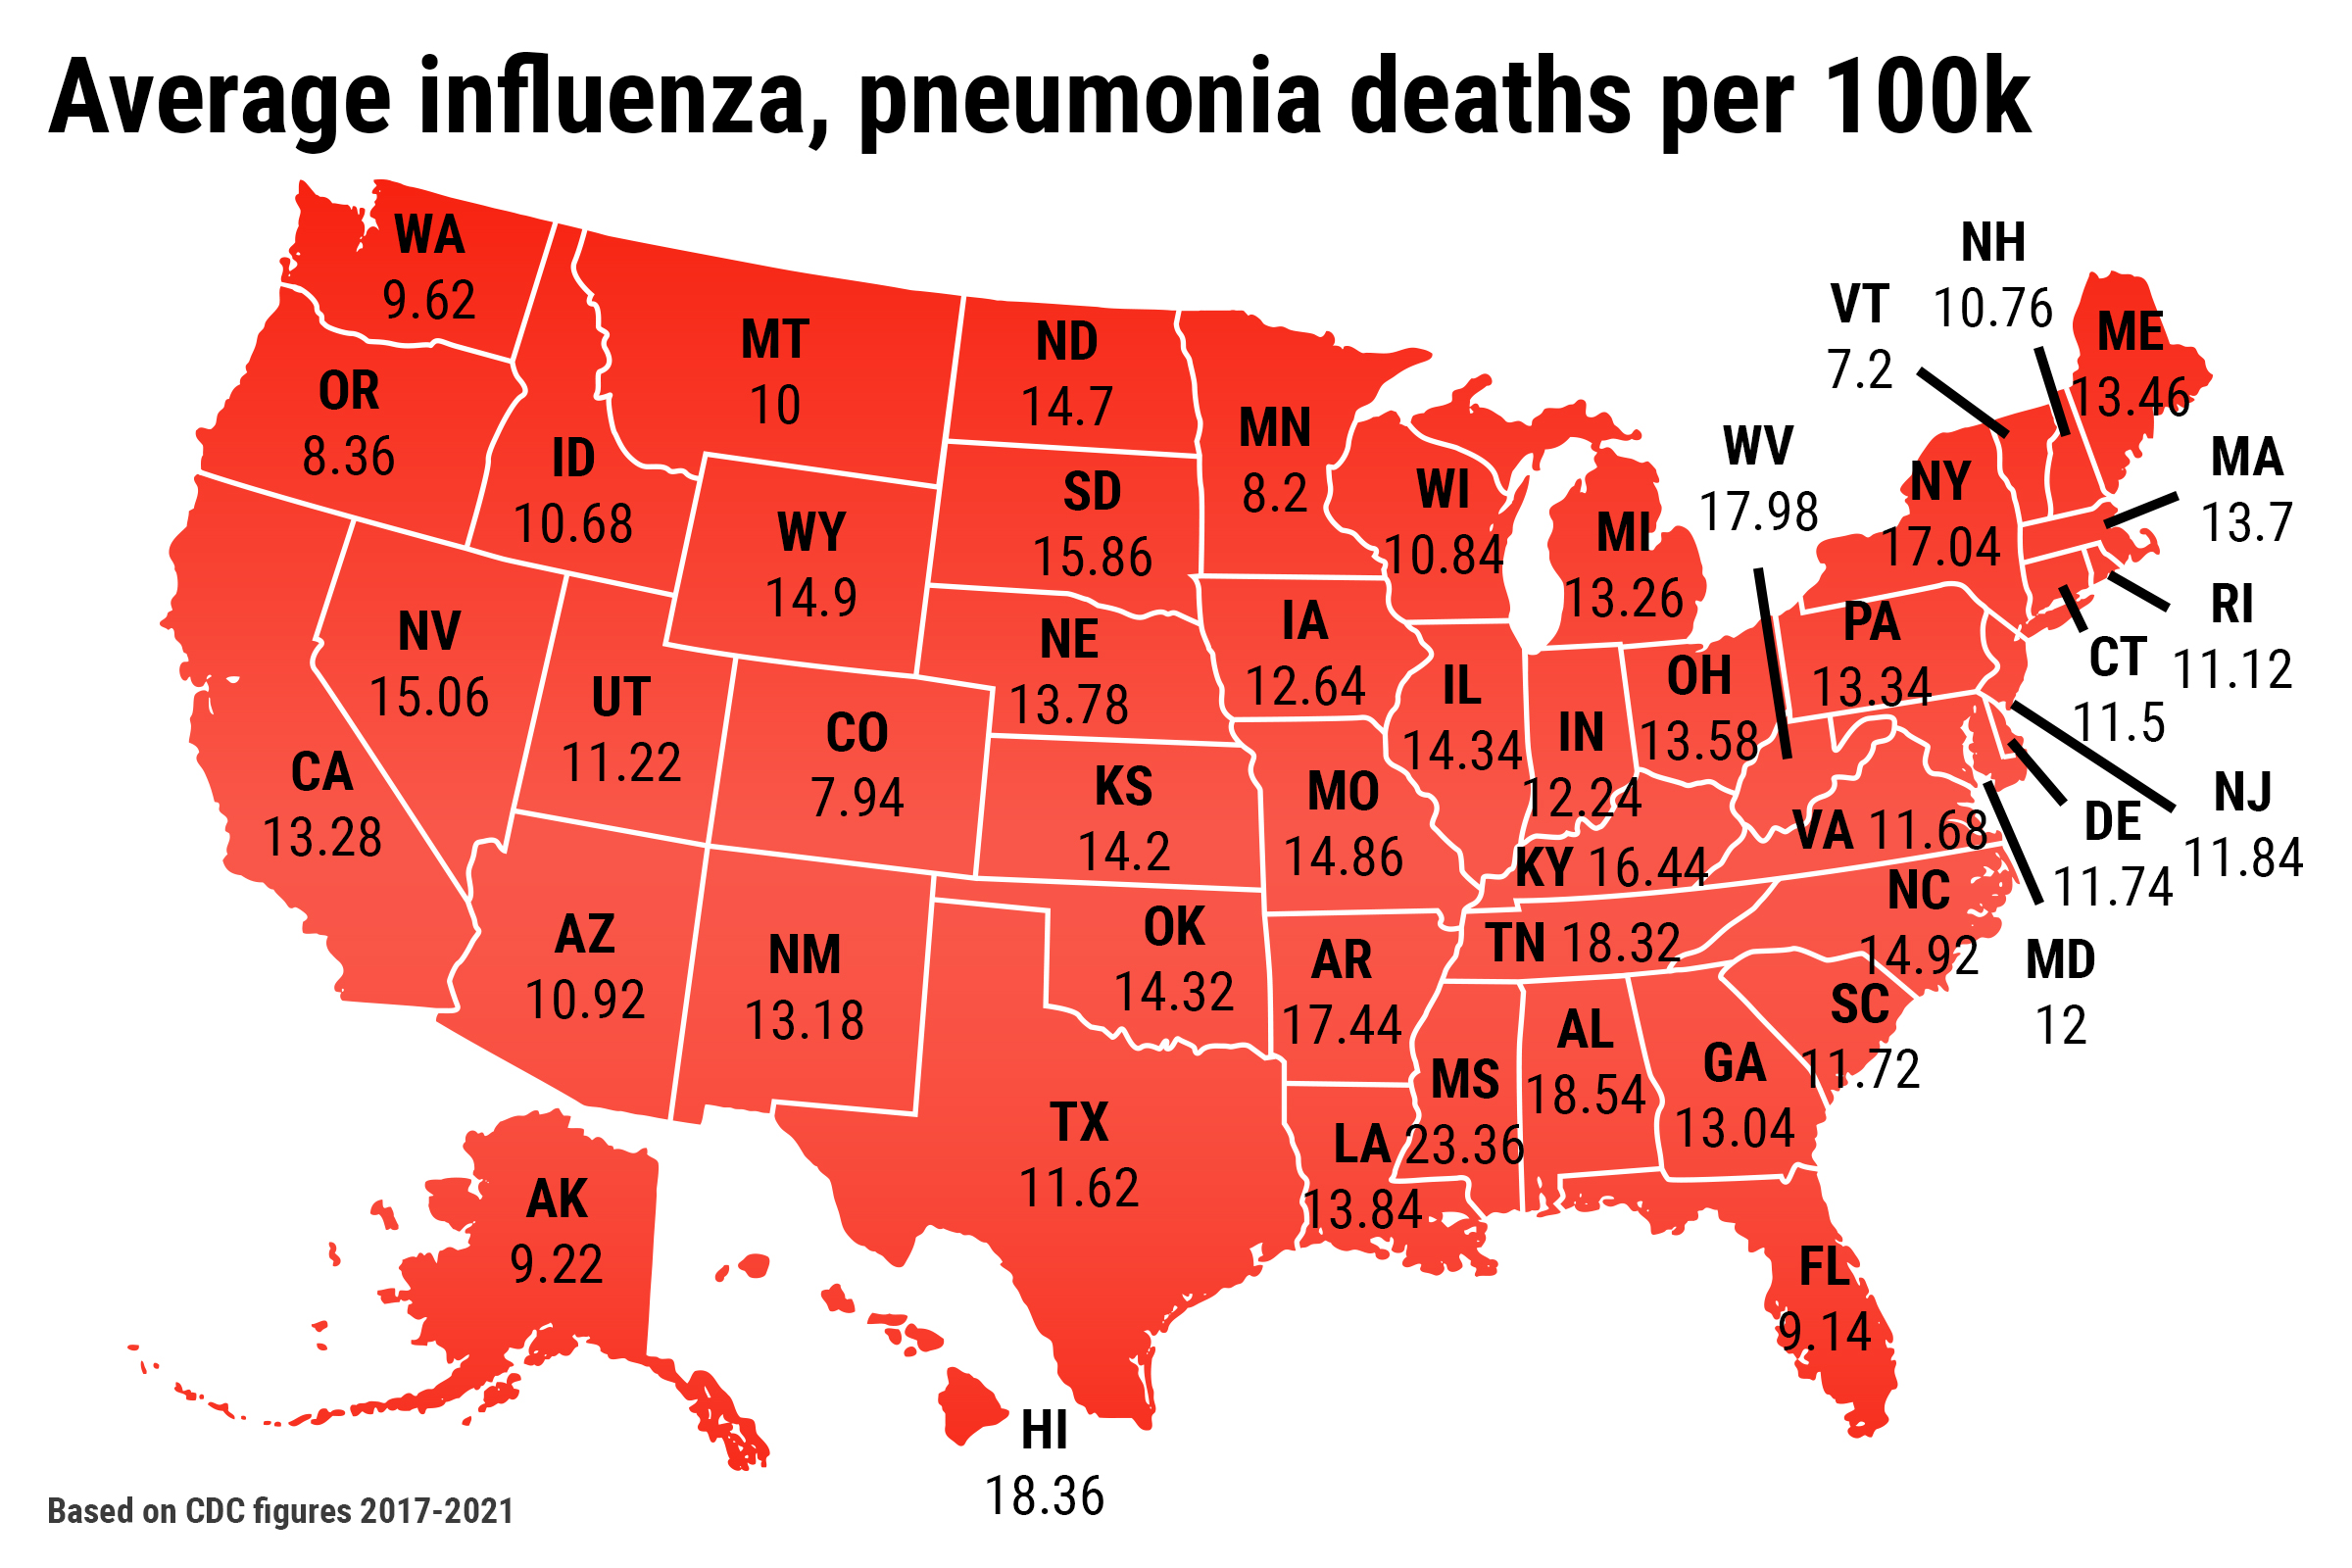 flu and pneumonia map shows us states with highest death rates